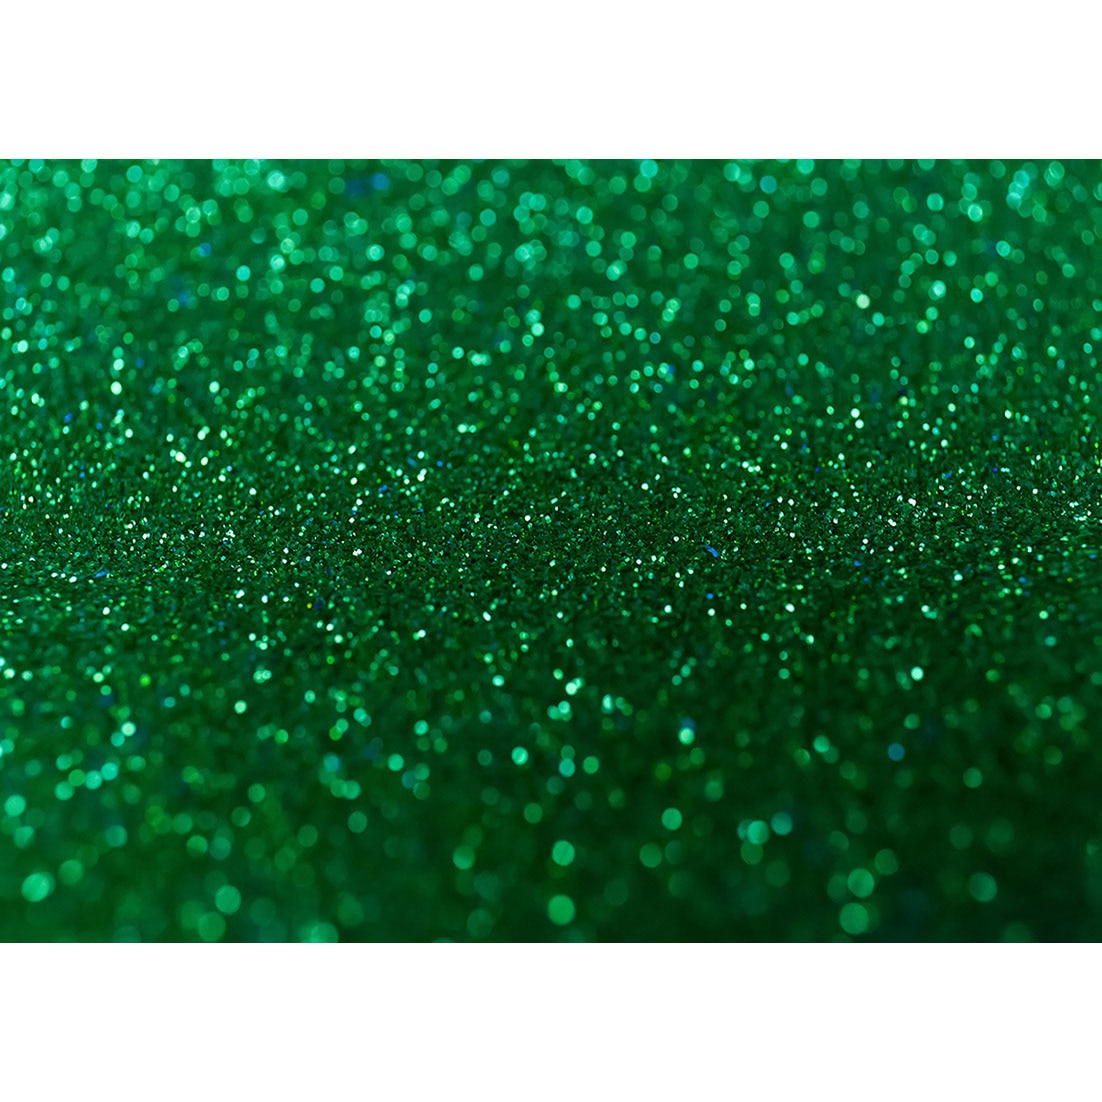 Green Glitter Sparkle Bokeh Photography Backdrop Vinyl Cloth Background Photo Studio for Children Birthday Party Prom Photophone. Background